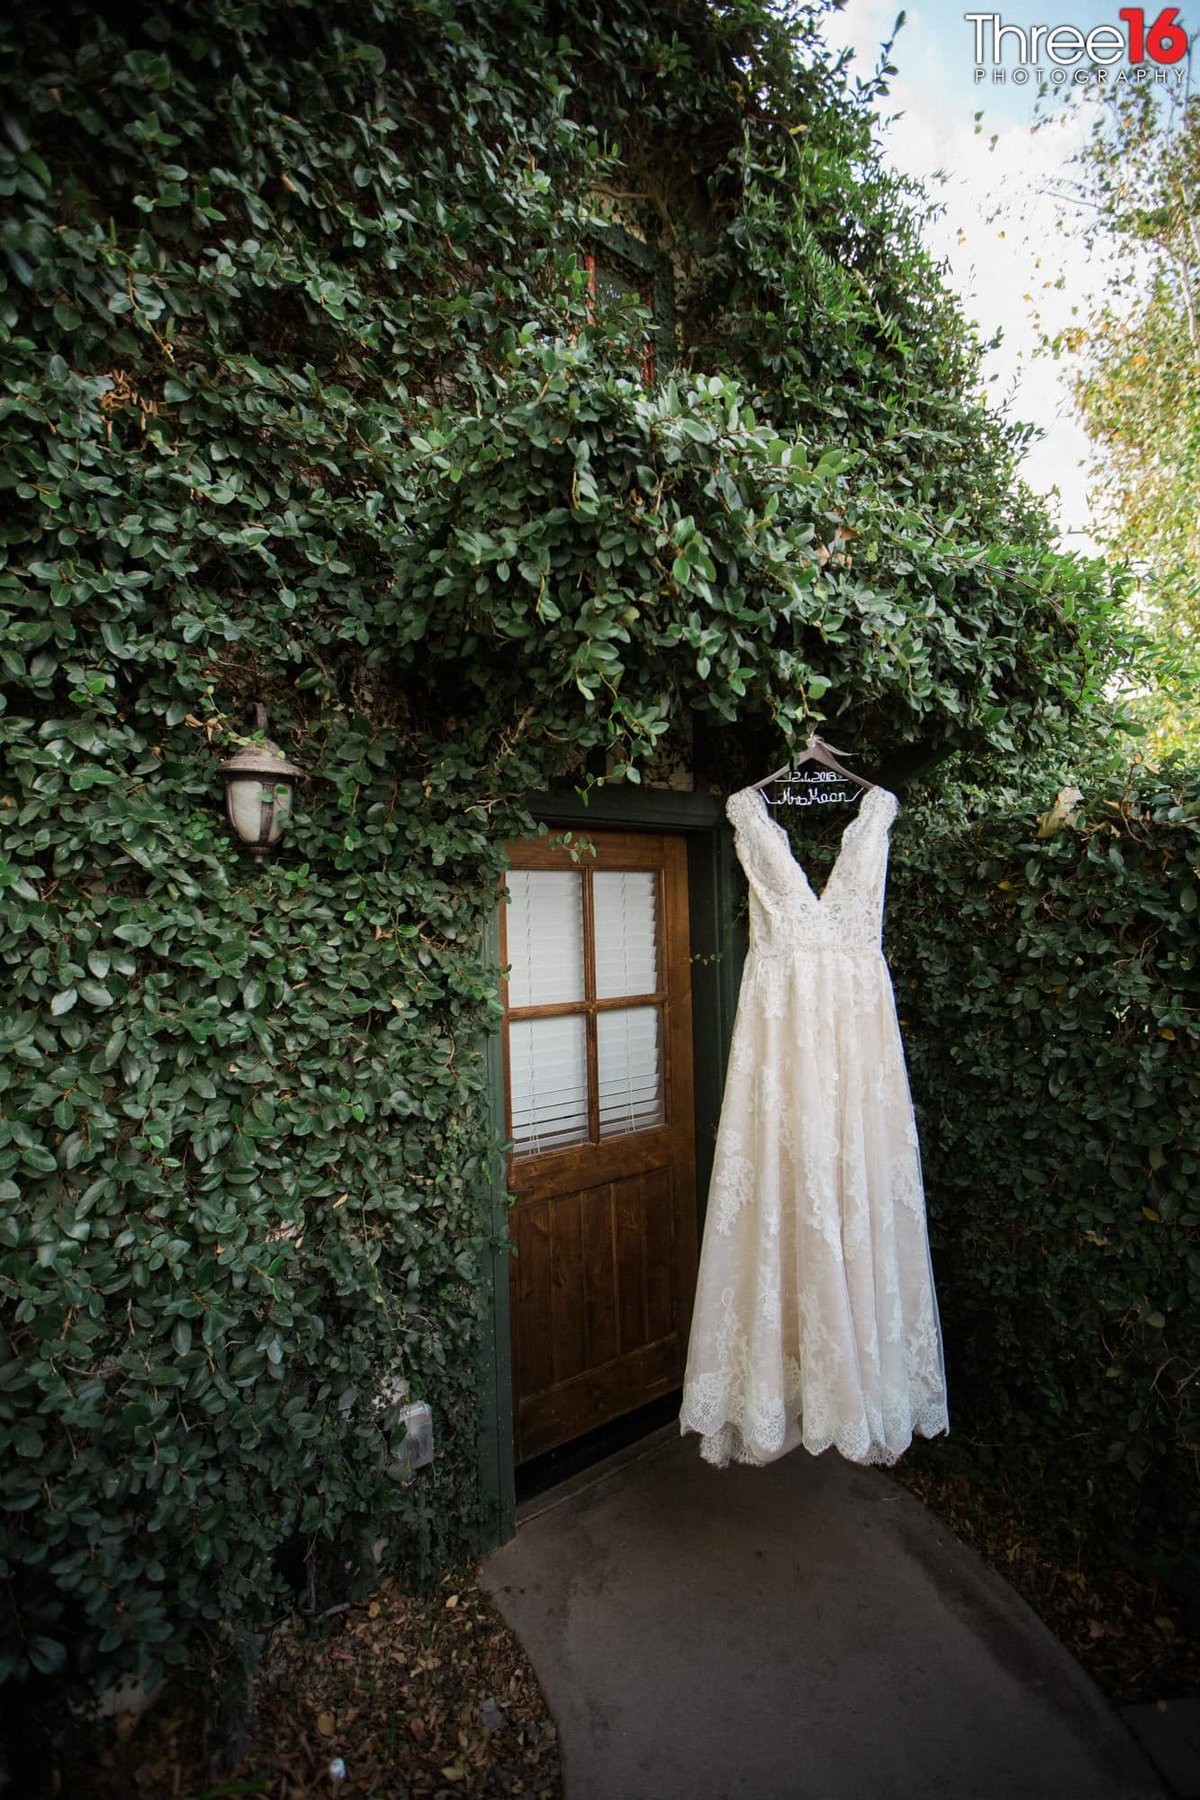 Bride's wedding dress hangs on display in front of a cottage with ivy covered wall and a door